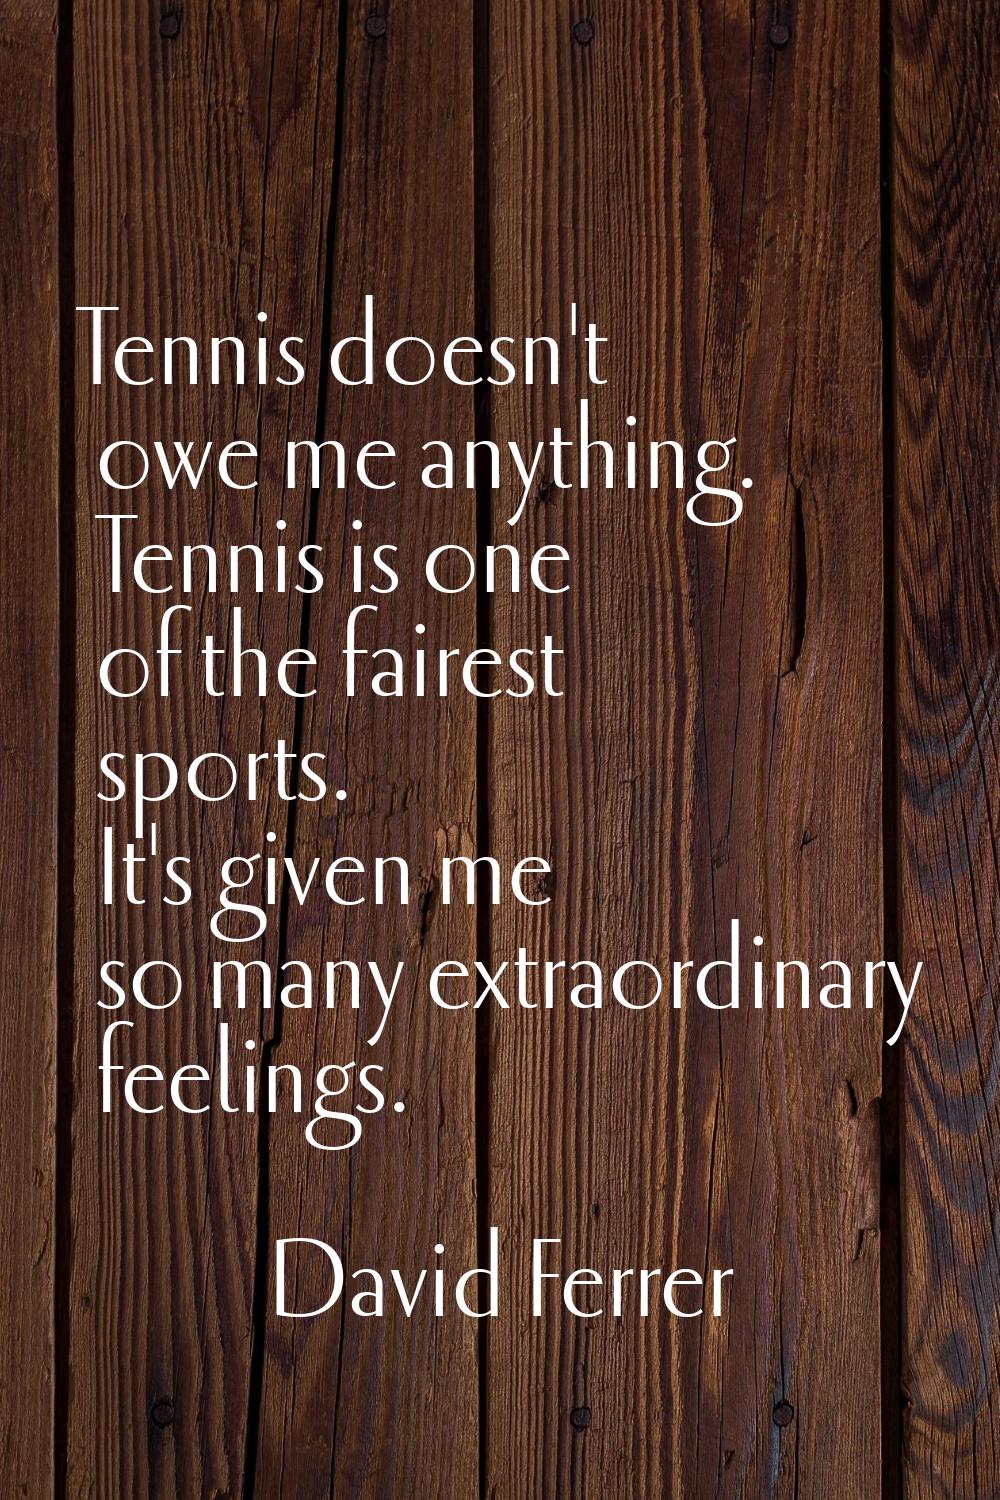 Tennis doesn't owe me anything. Tennis is one of the fairest sports. It's given me so many extraord